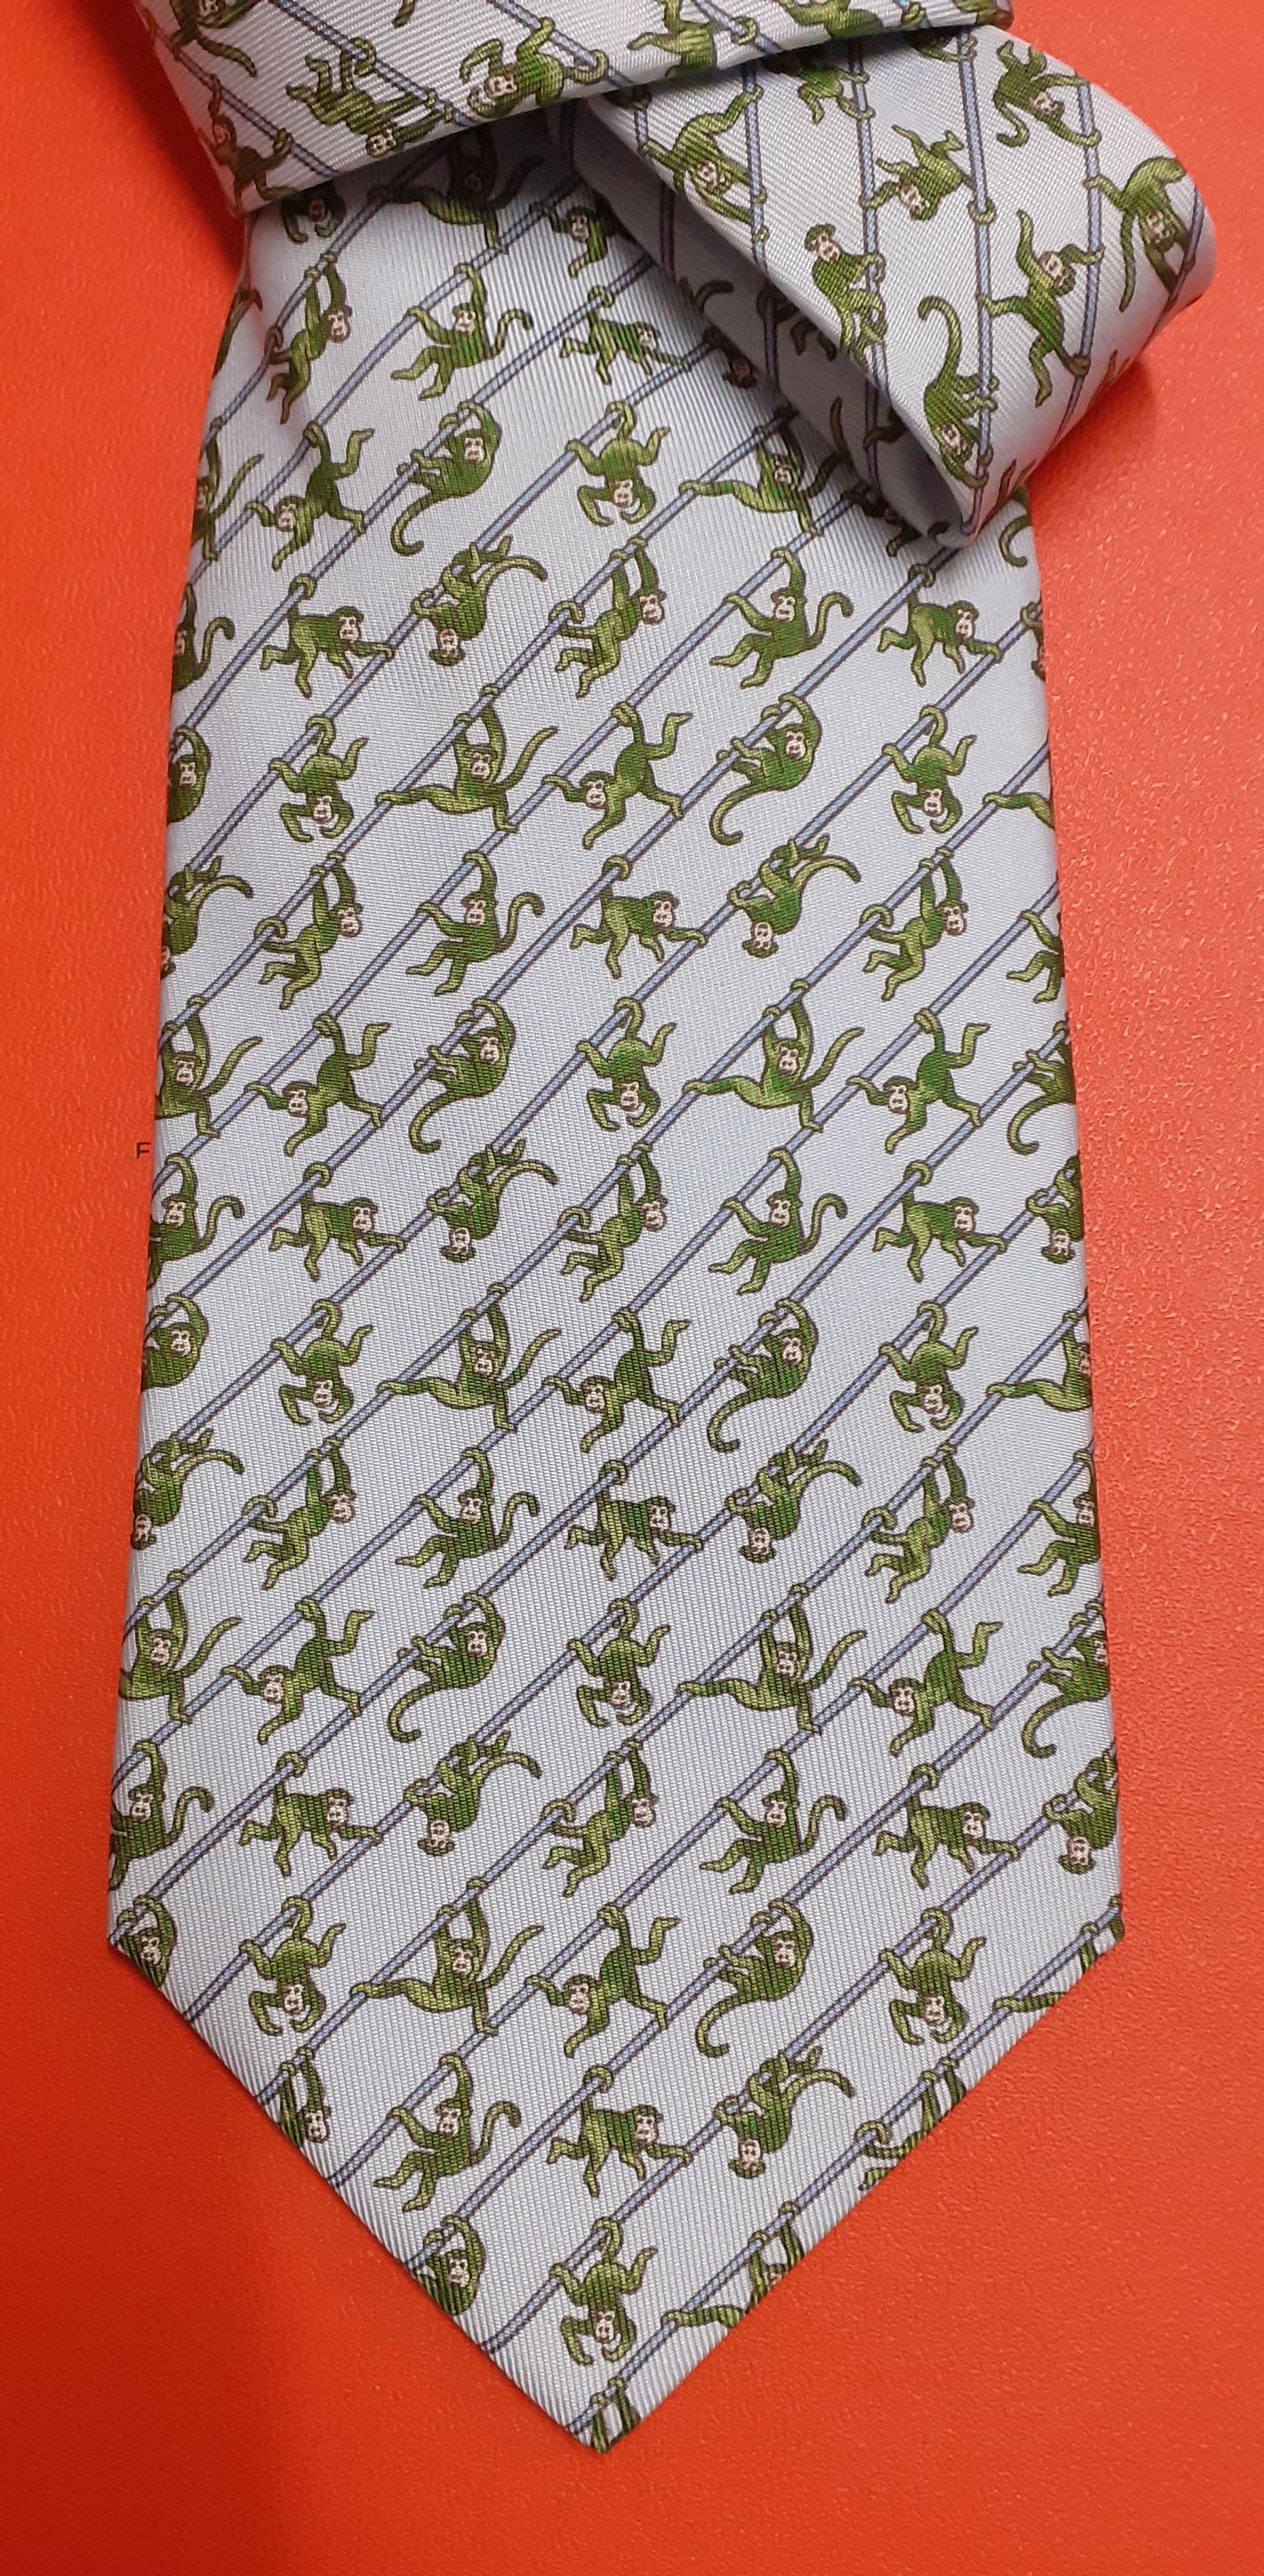 Adorable and Funny Authentic Hermès Tie

From the 